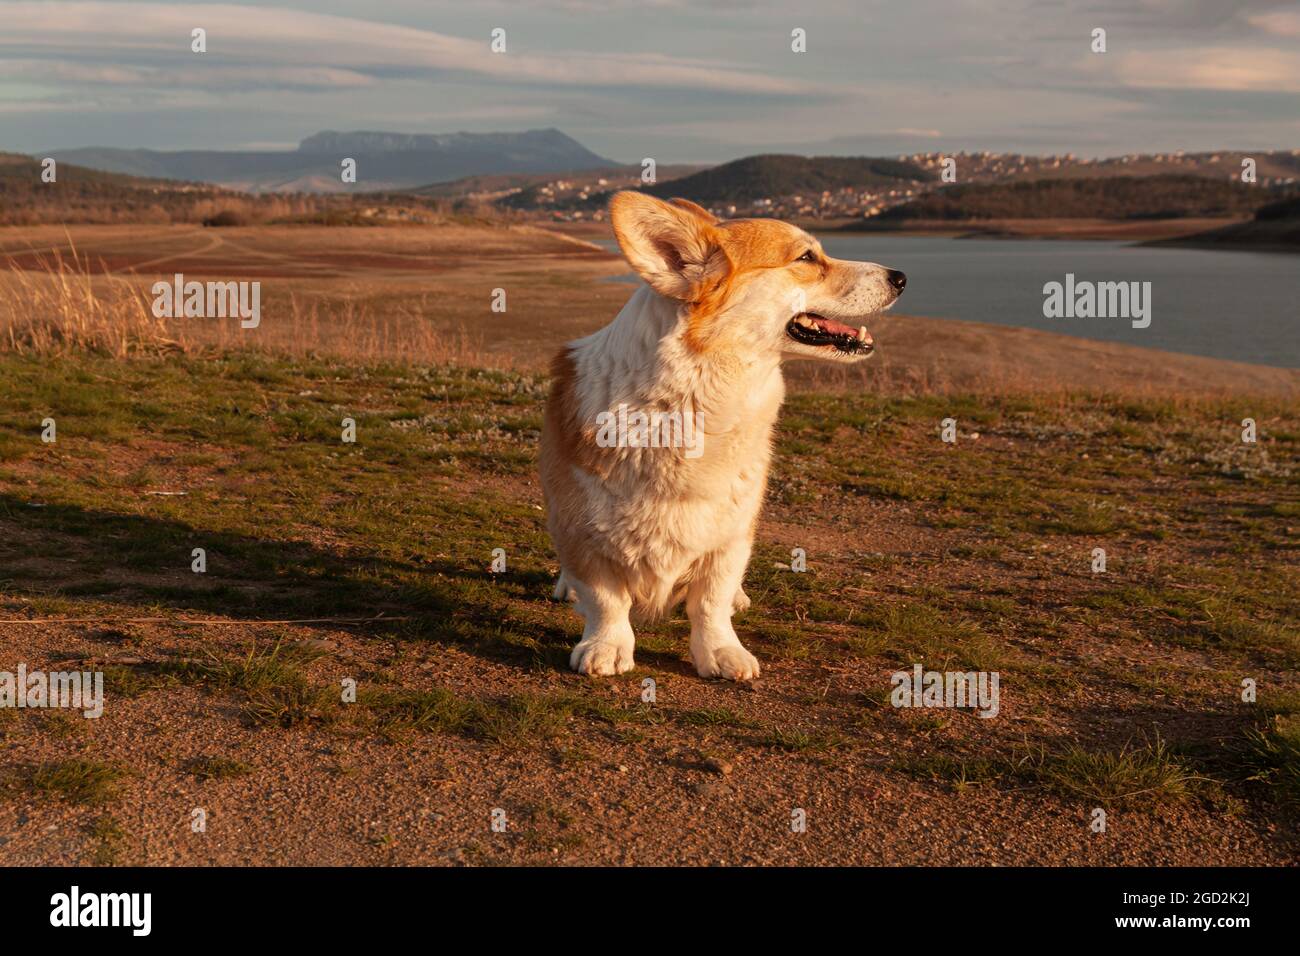 One cute pembroke welsh corgi looks and smiles at the camera against the background of the mountain in the sunset light. Hiking in the mountains Stock Photo